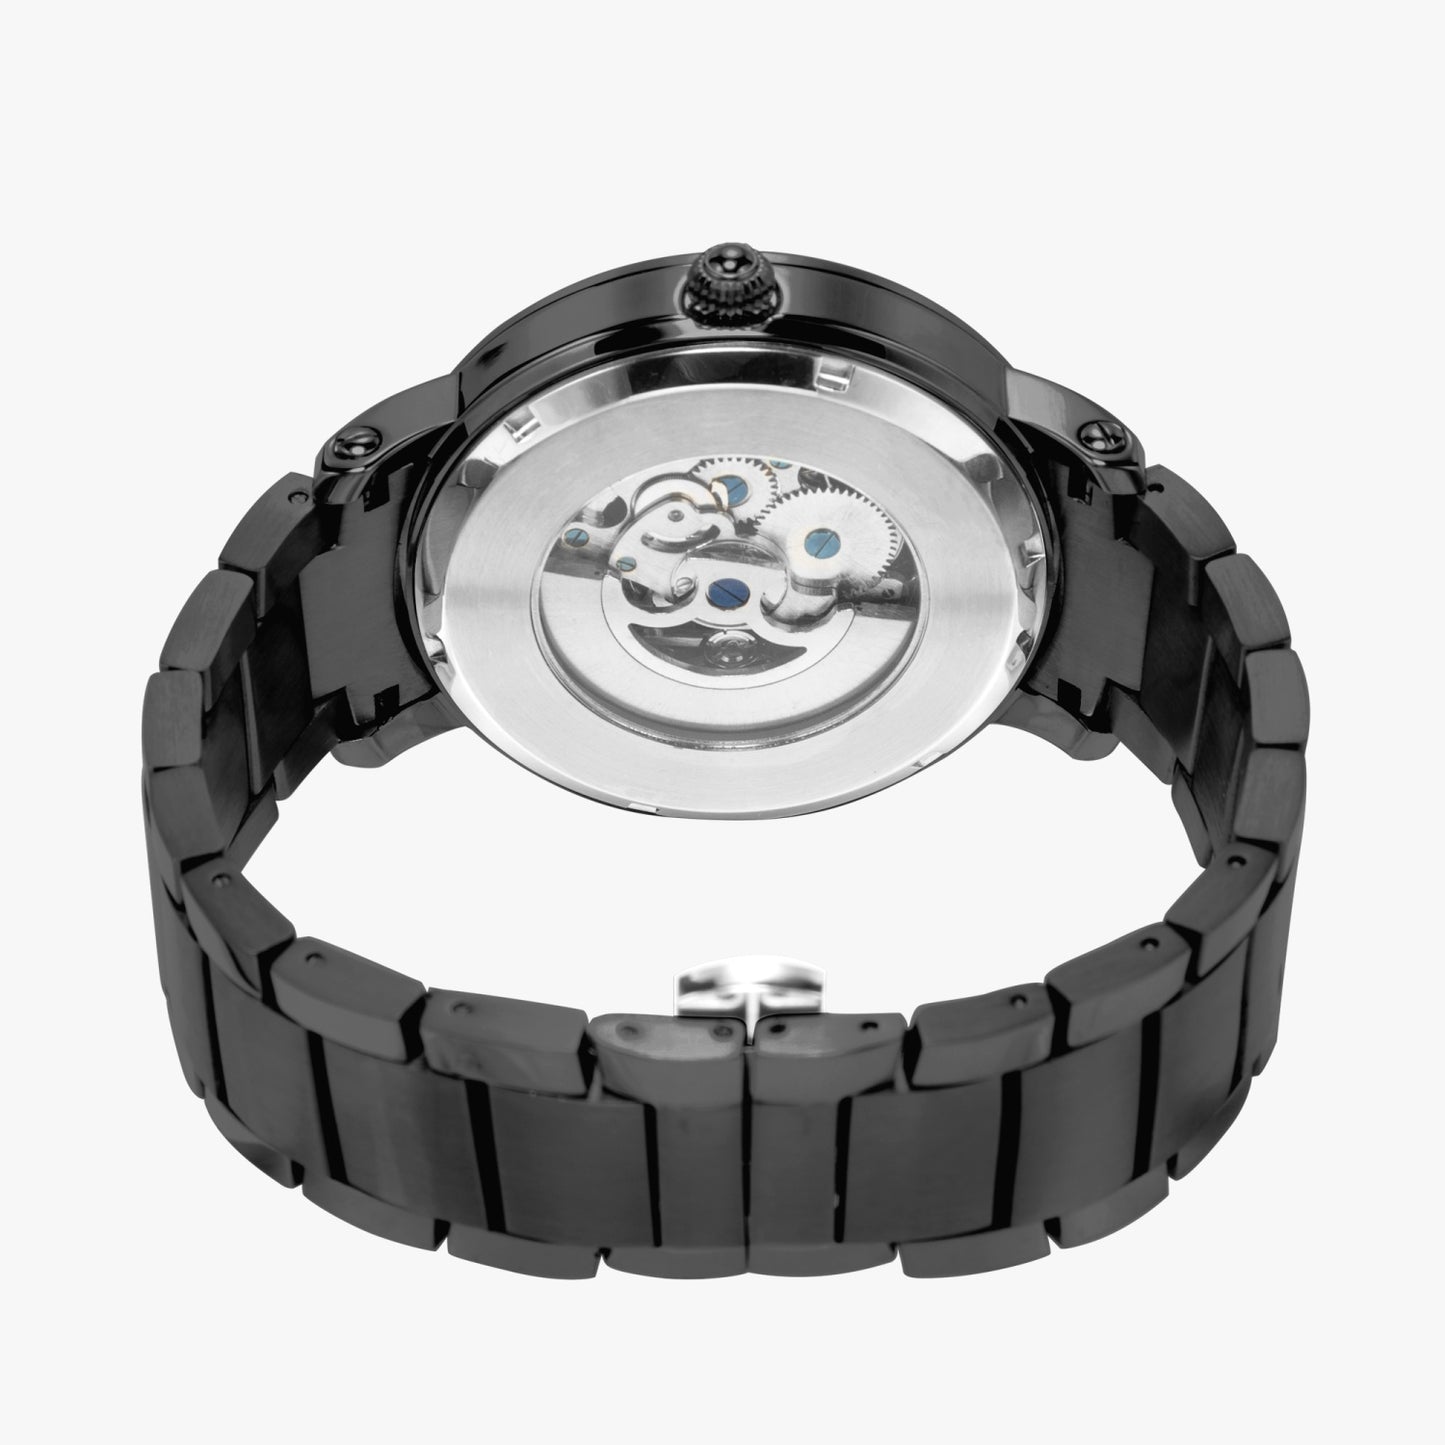 Juve Automatic Movement Watch - Premium Stainless Steel